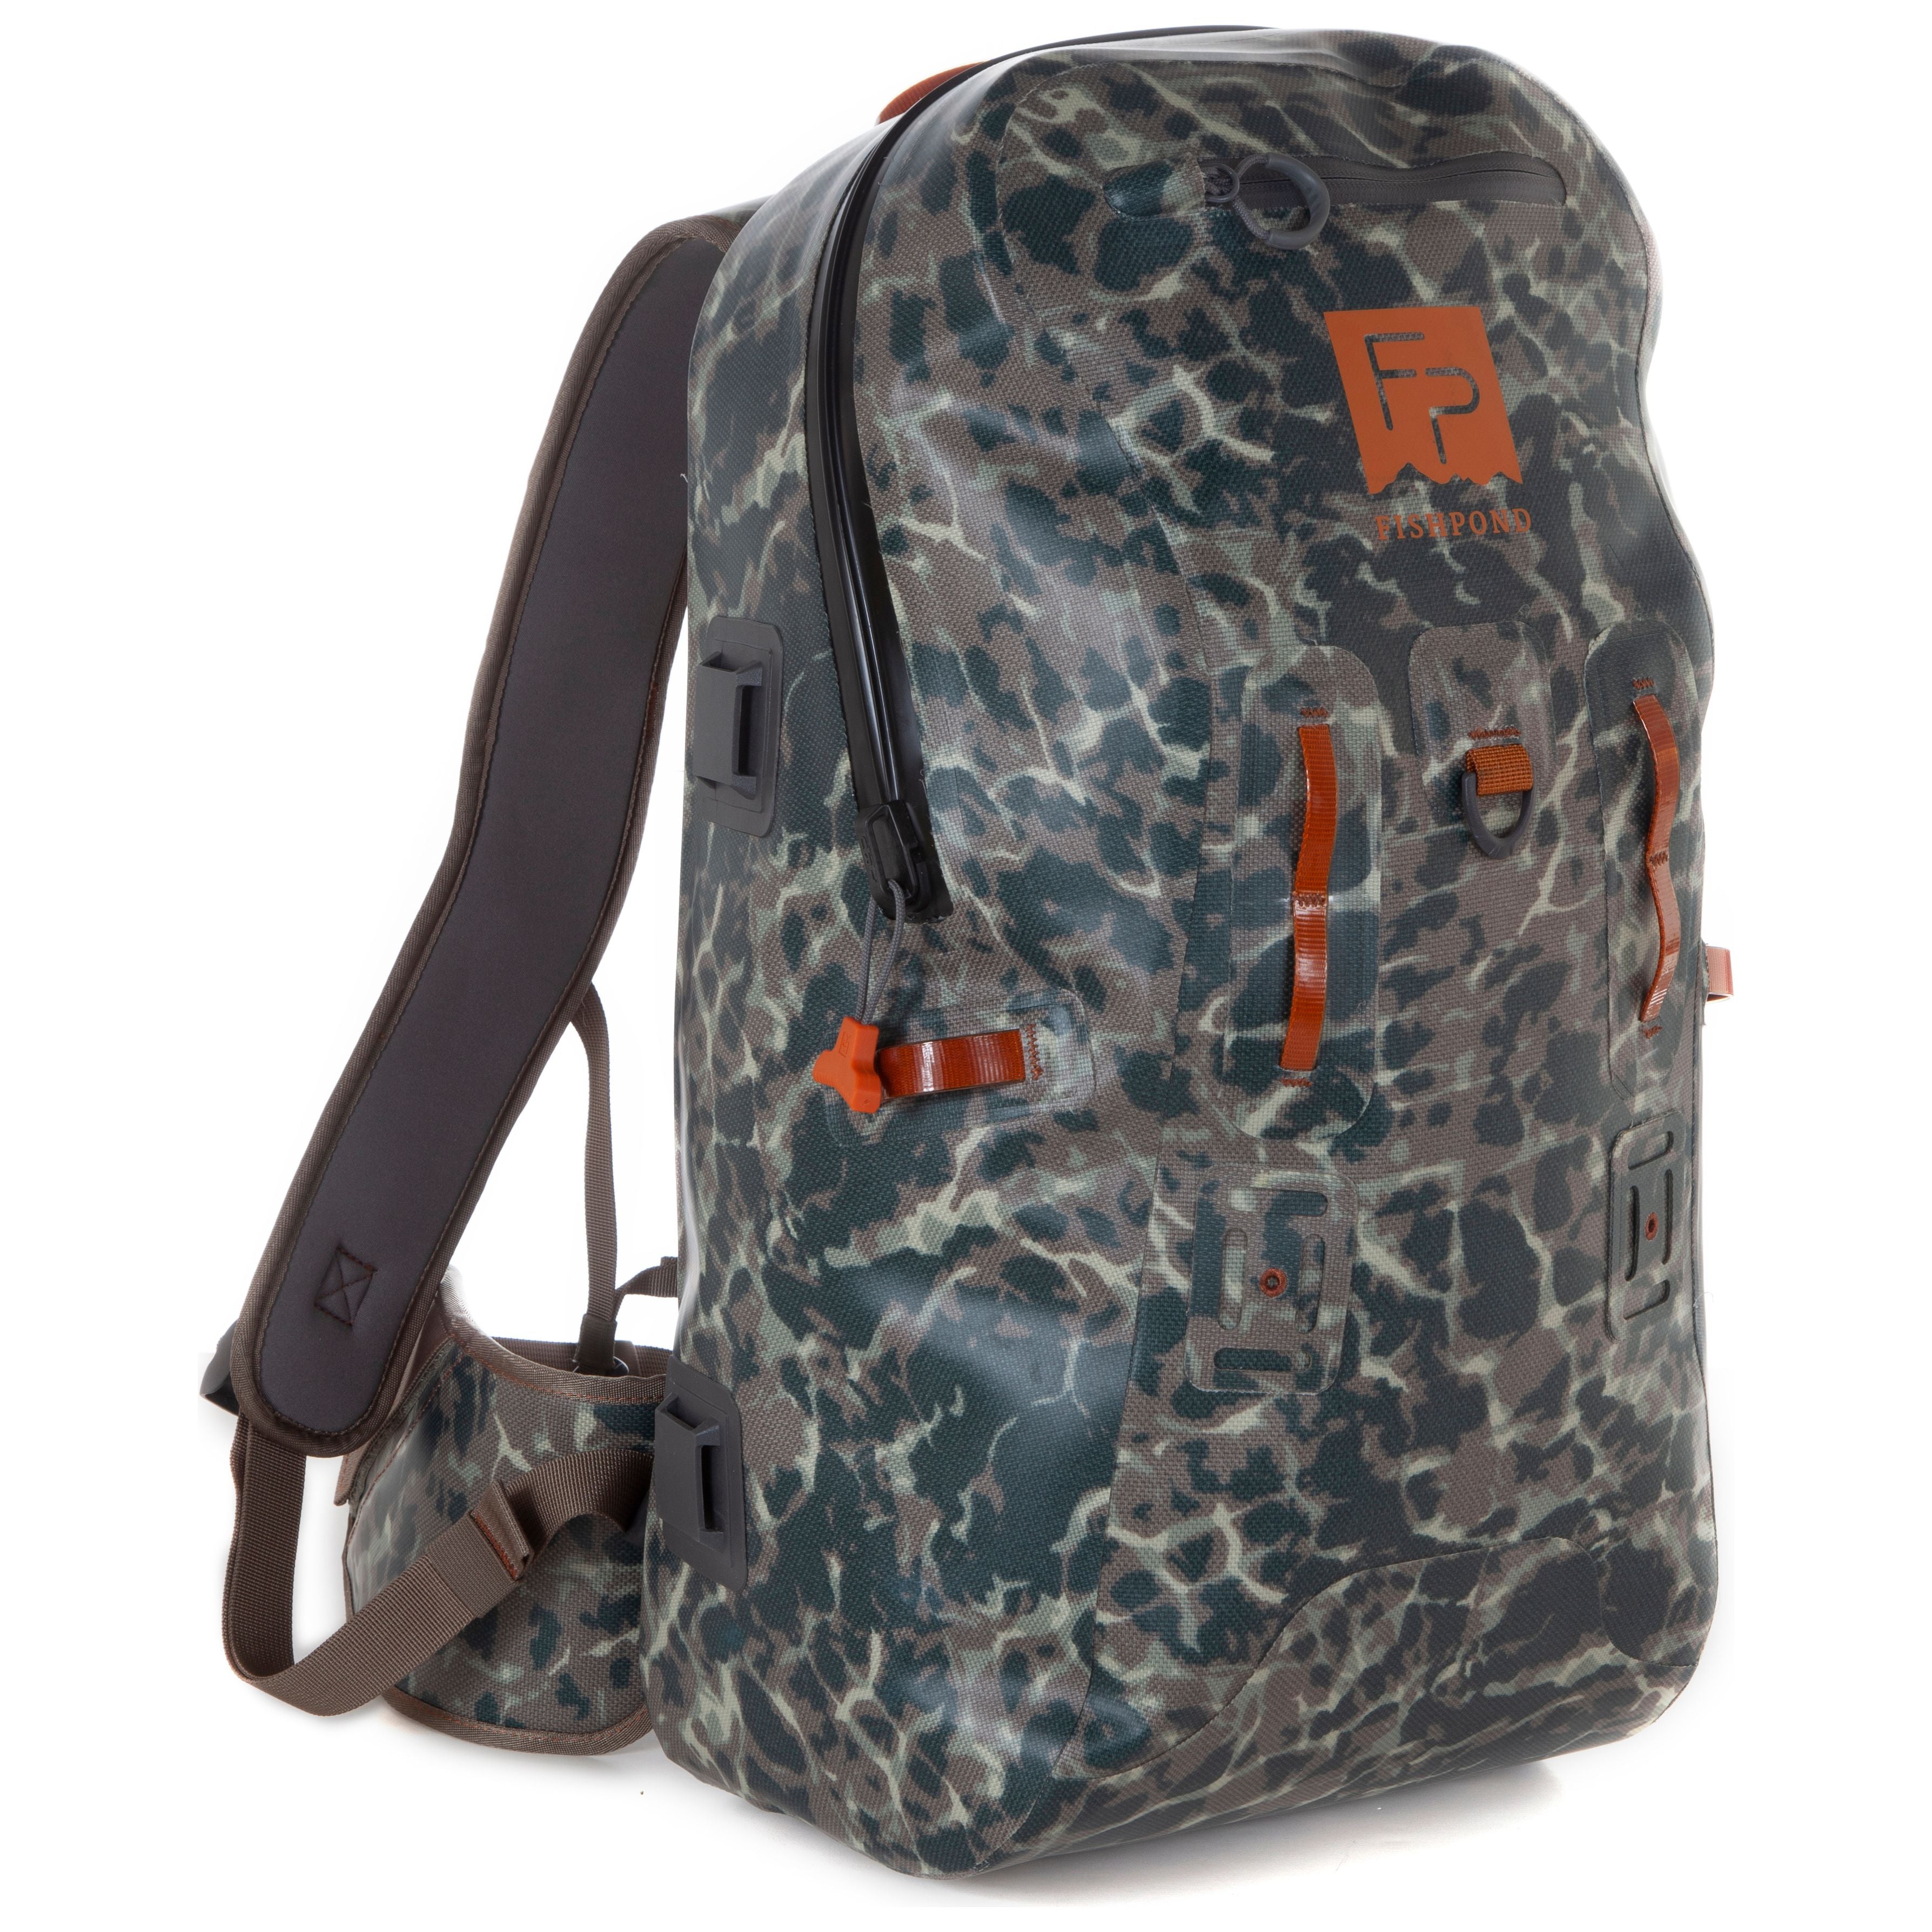 Wind River Roll Top Backpack – Madison Double R